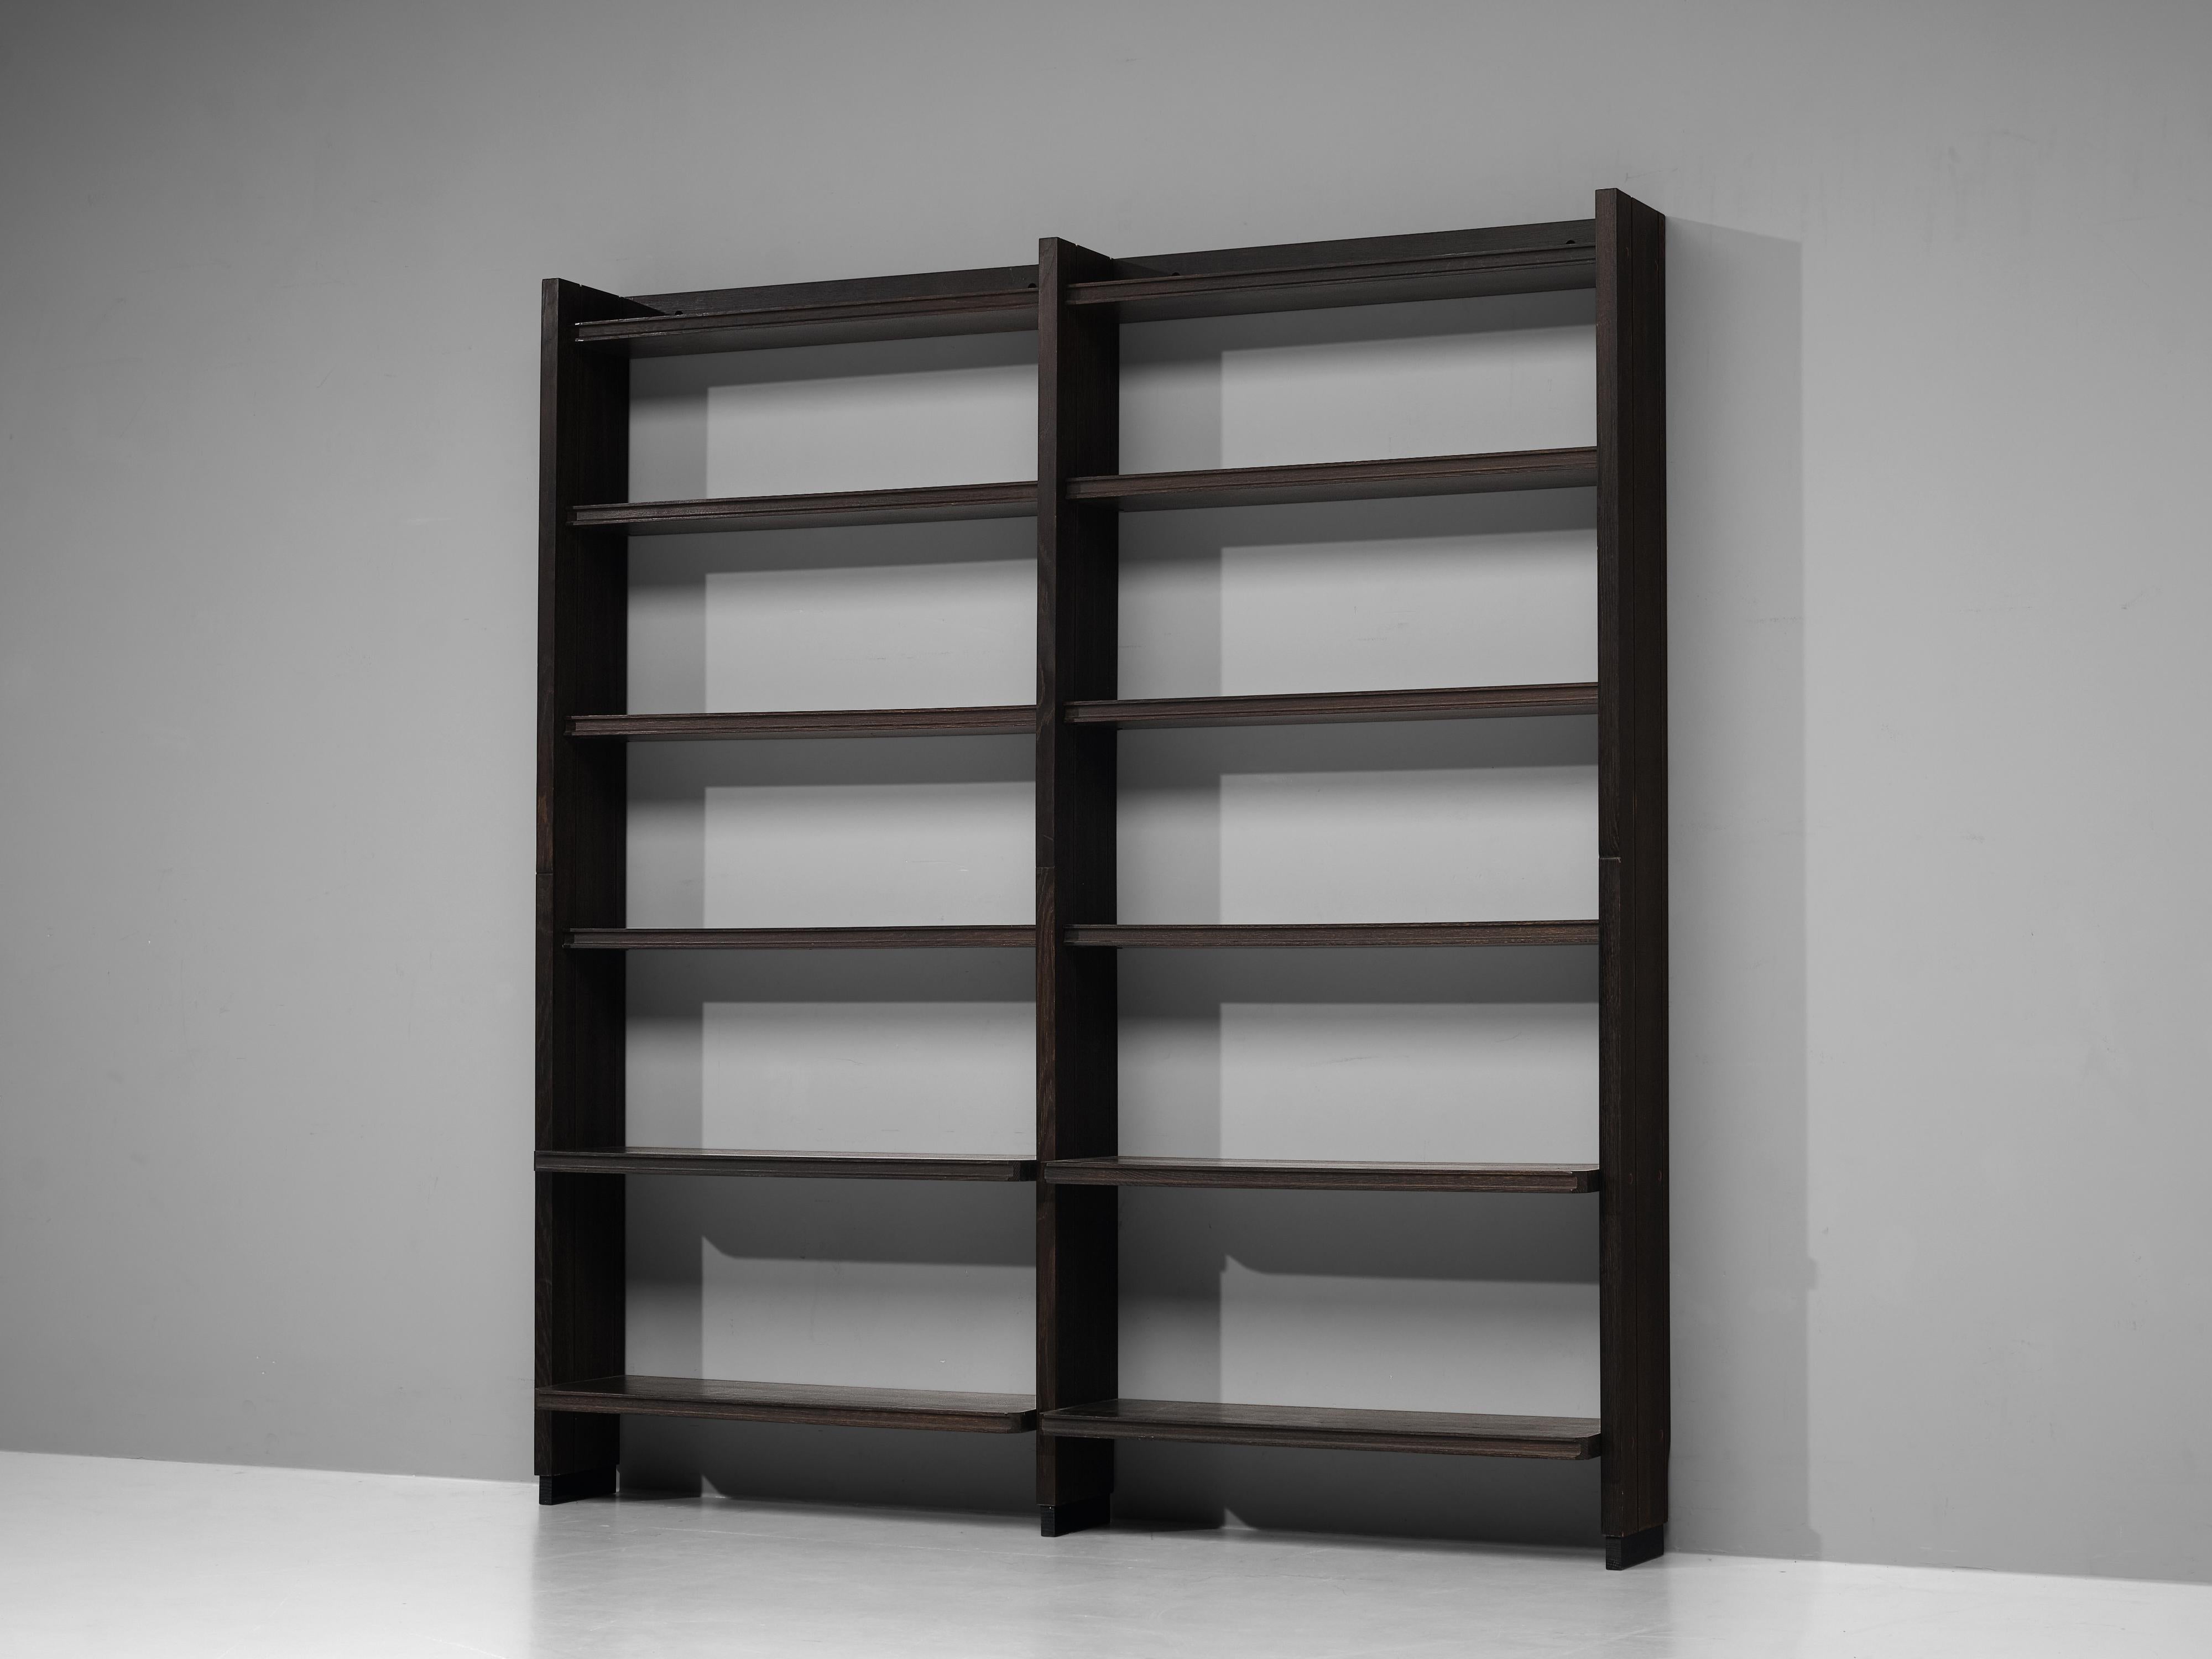 Guillerme & Chambron, bookcase, stained oak, France, 1960s

French bookcase in solid oak by designer duo Guillerme & Chambron. This open bookcase has a simplified yet elegant design. Divded in the middle, each part has six shelves that allow you